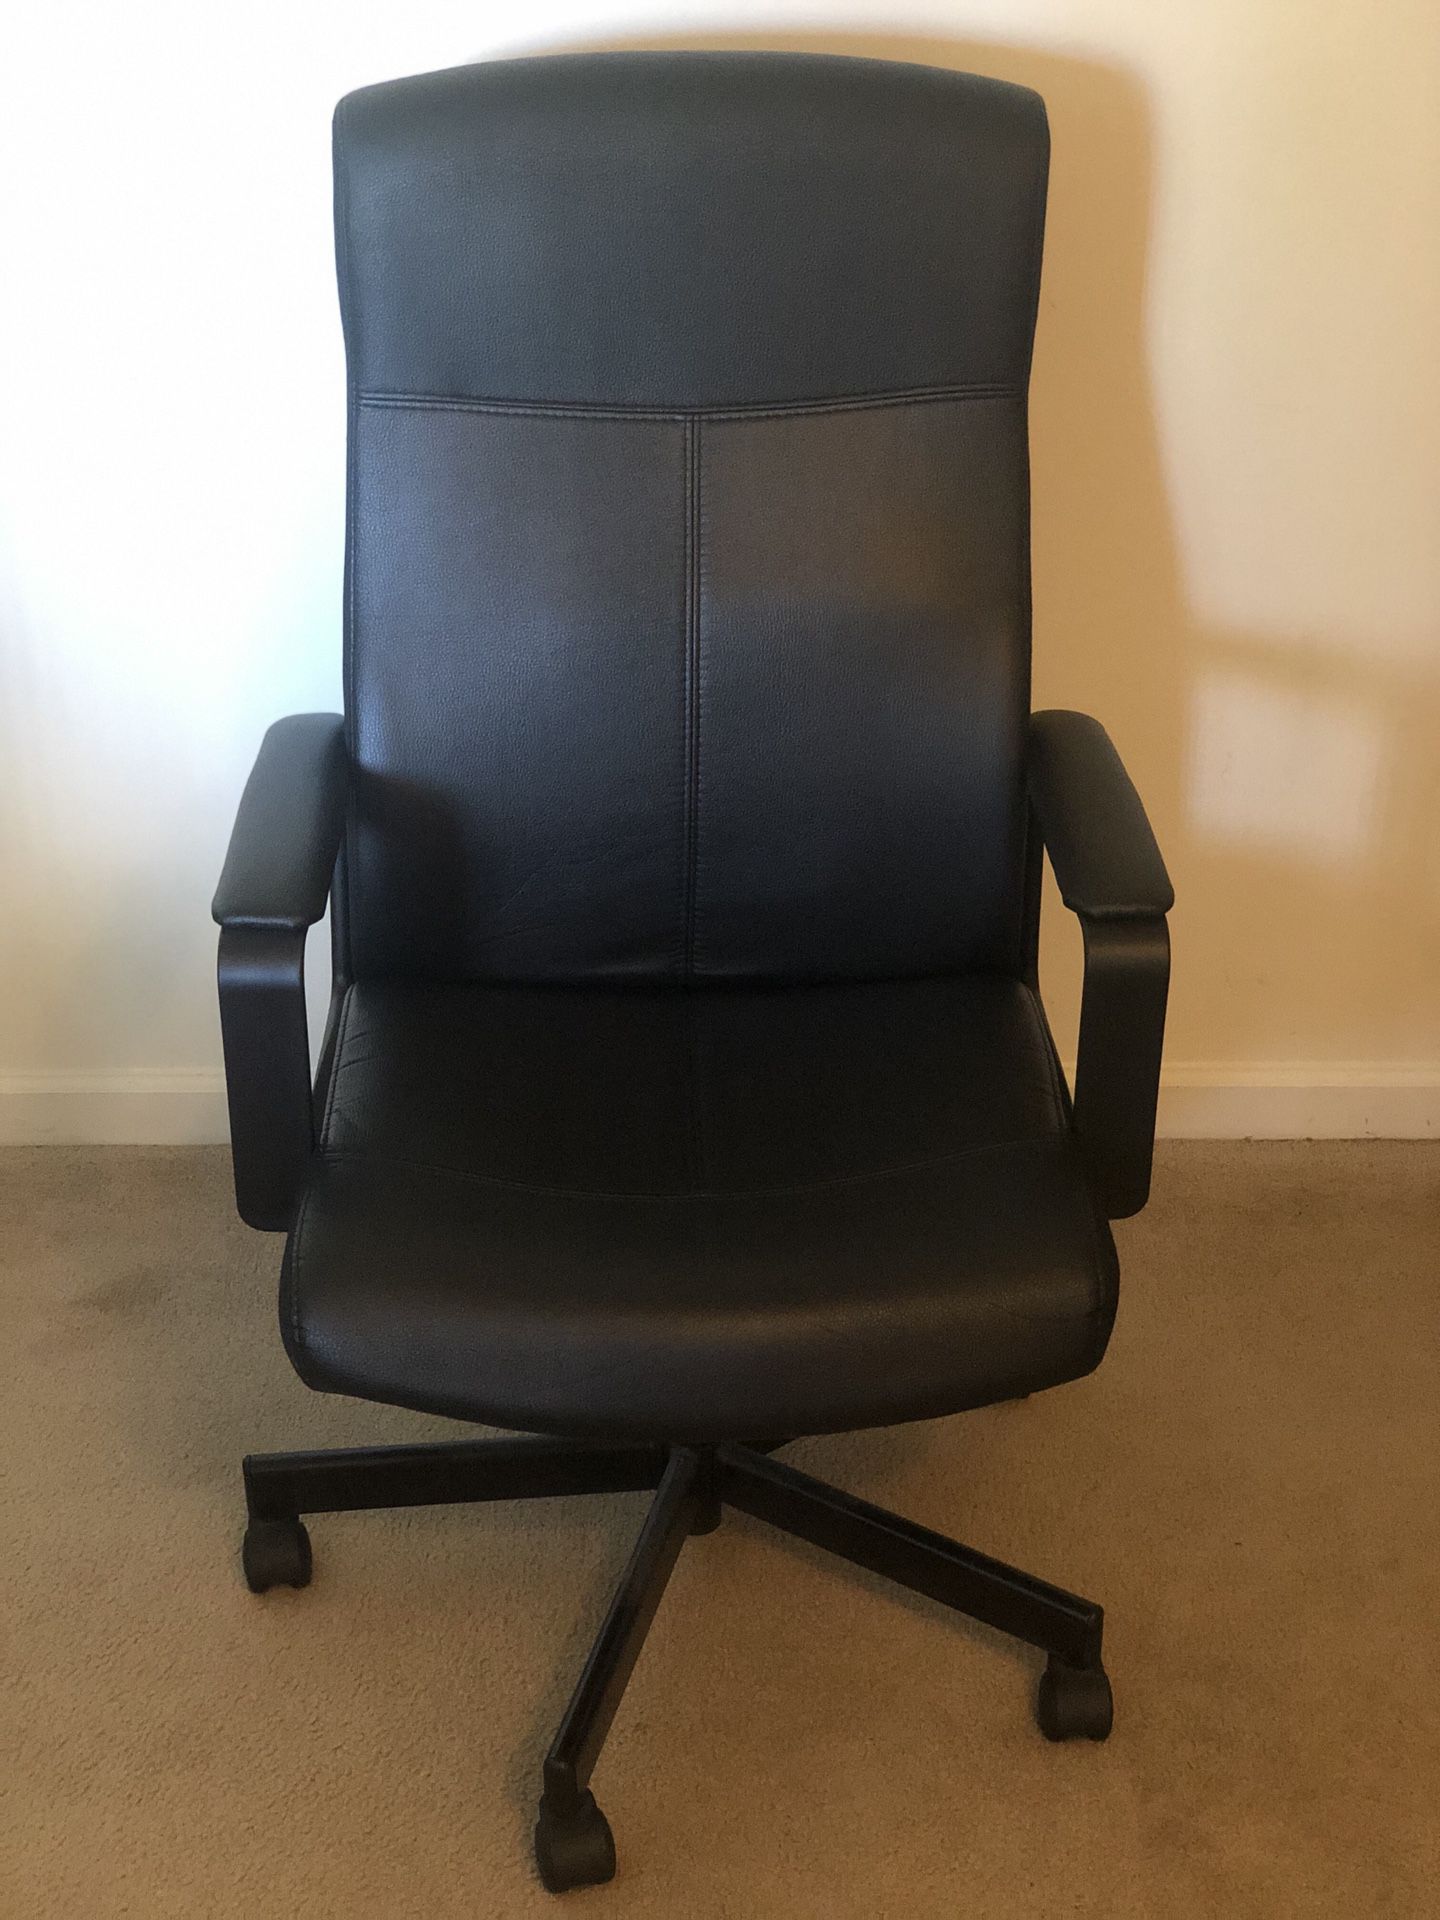 Black Leather Chair